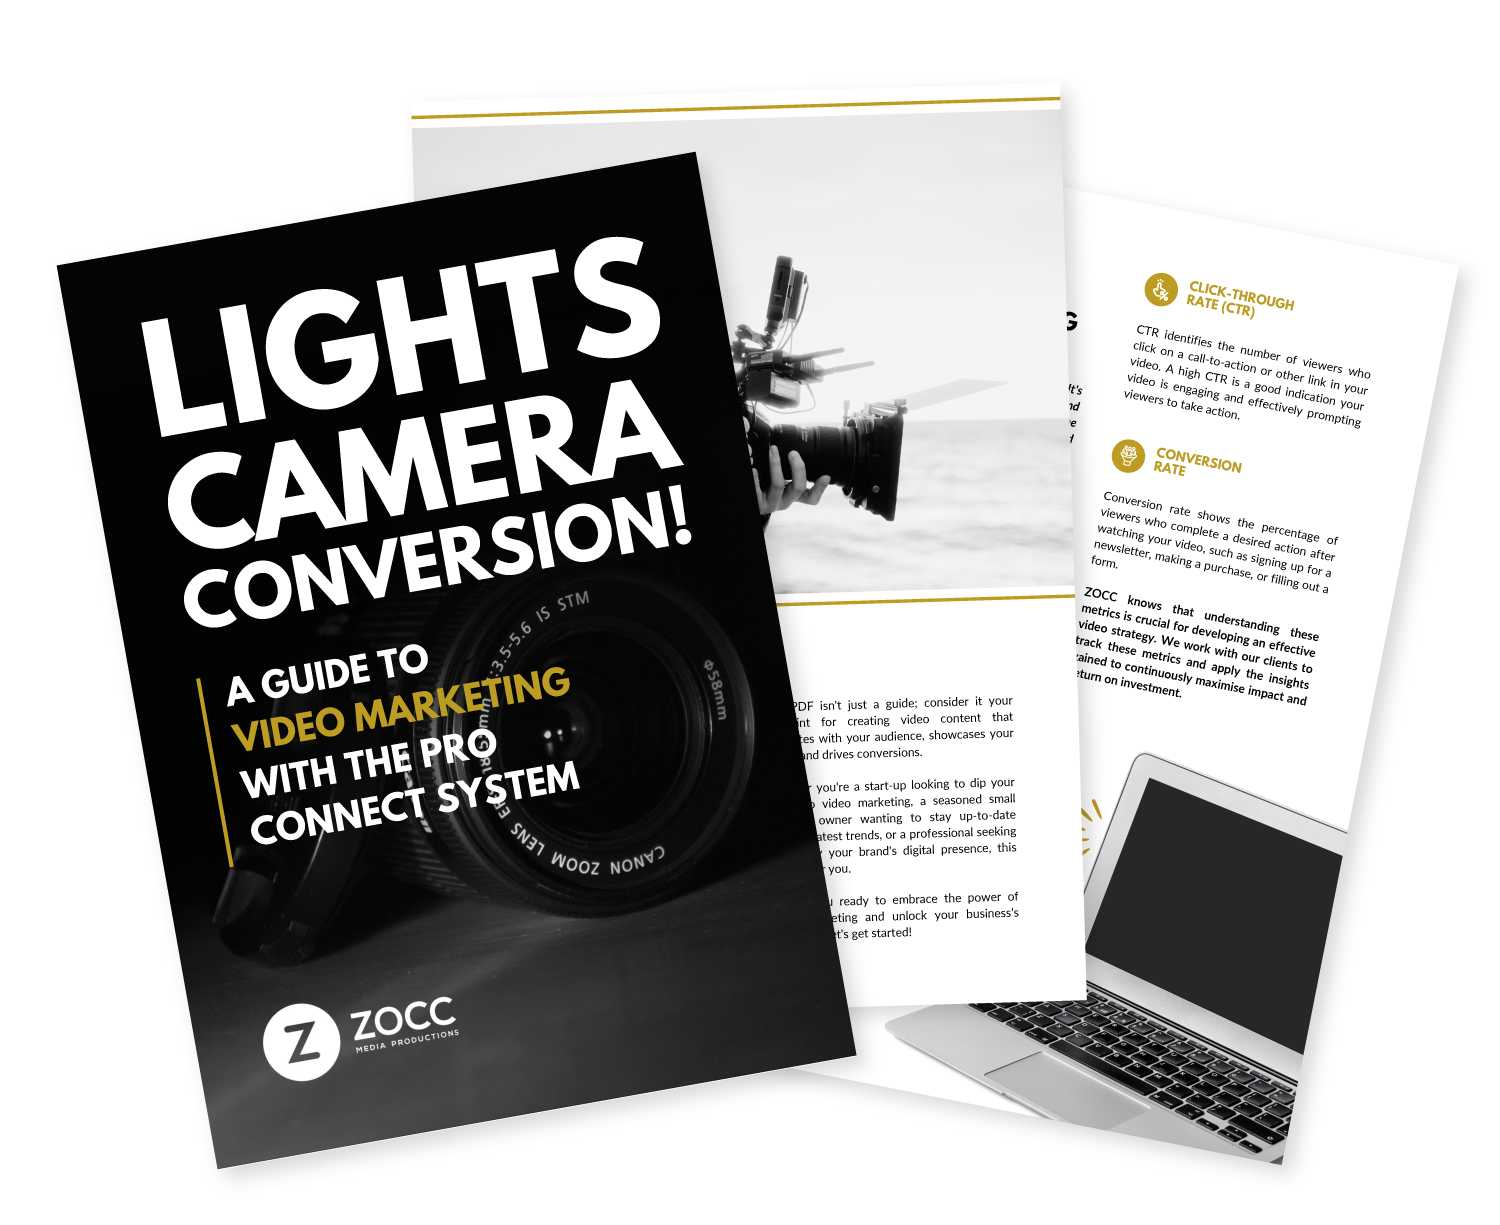 Lights Camera Conversion. A guide to video marketing with the pro connect system by ZOCC Media